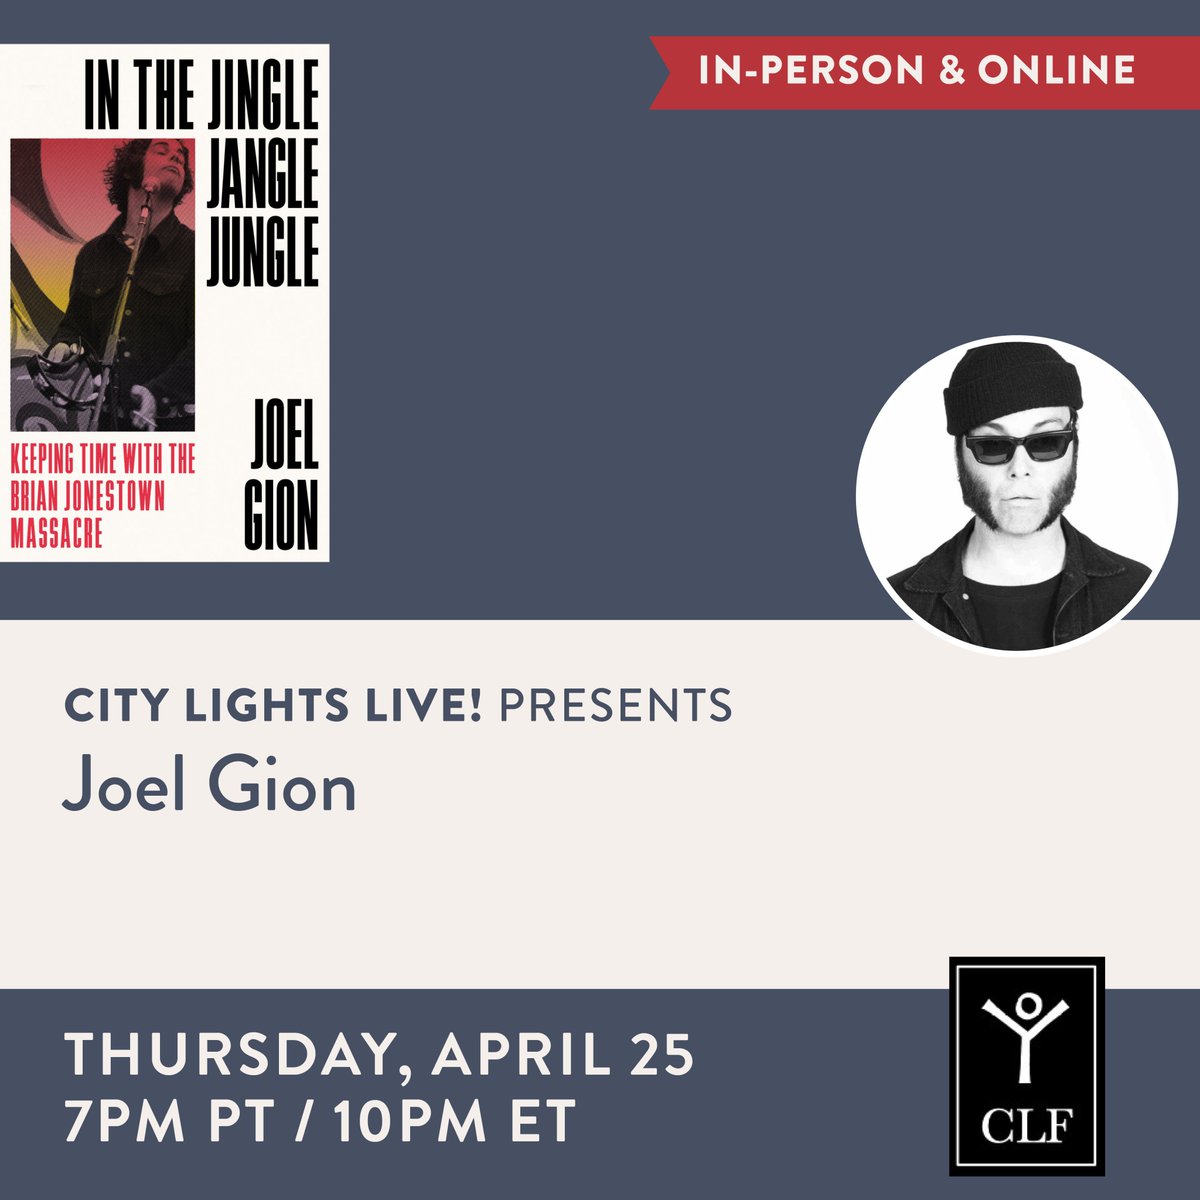 Thurs eve @7pm, here at City Lights: @realjoelgion Joel Gion celebrates the publication of IN THE JINGLE JANGLE JUNGLE: Keeping Time with the Brian Jonestown Massacre, published by @rarebirdlit If you can't make it, sign up for the livestream: citylights.com/.../joel-gion-…